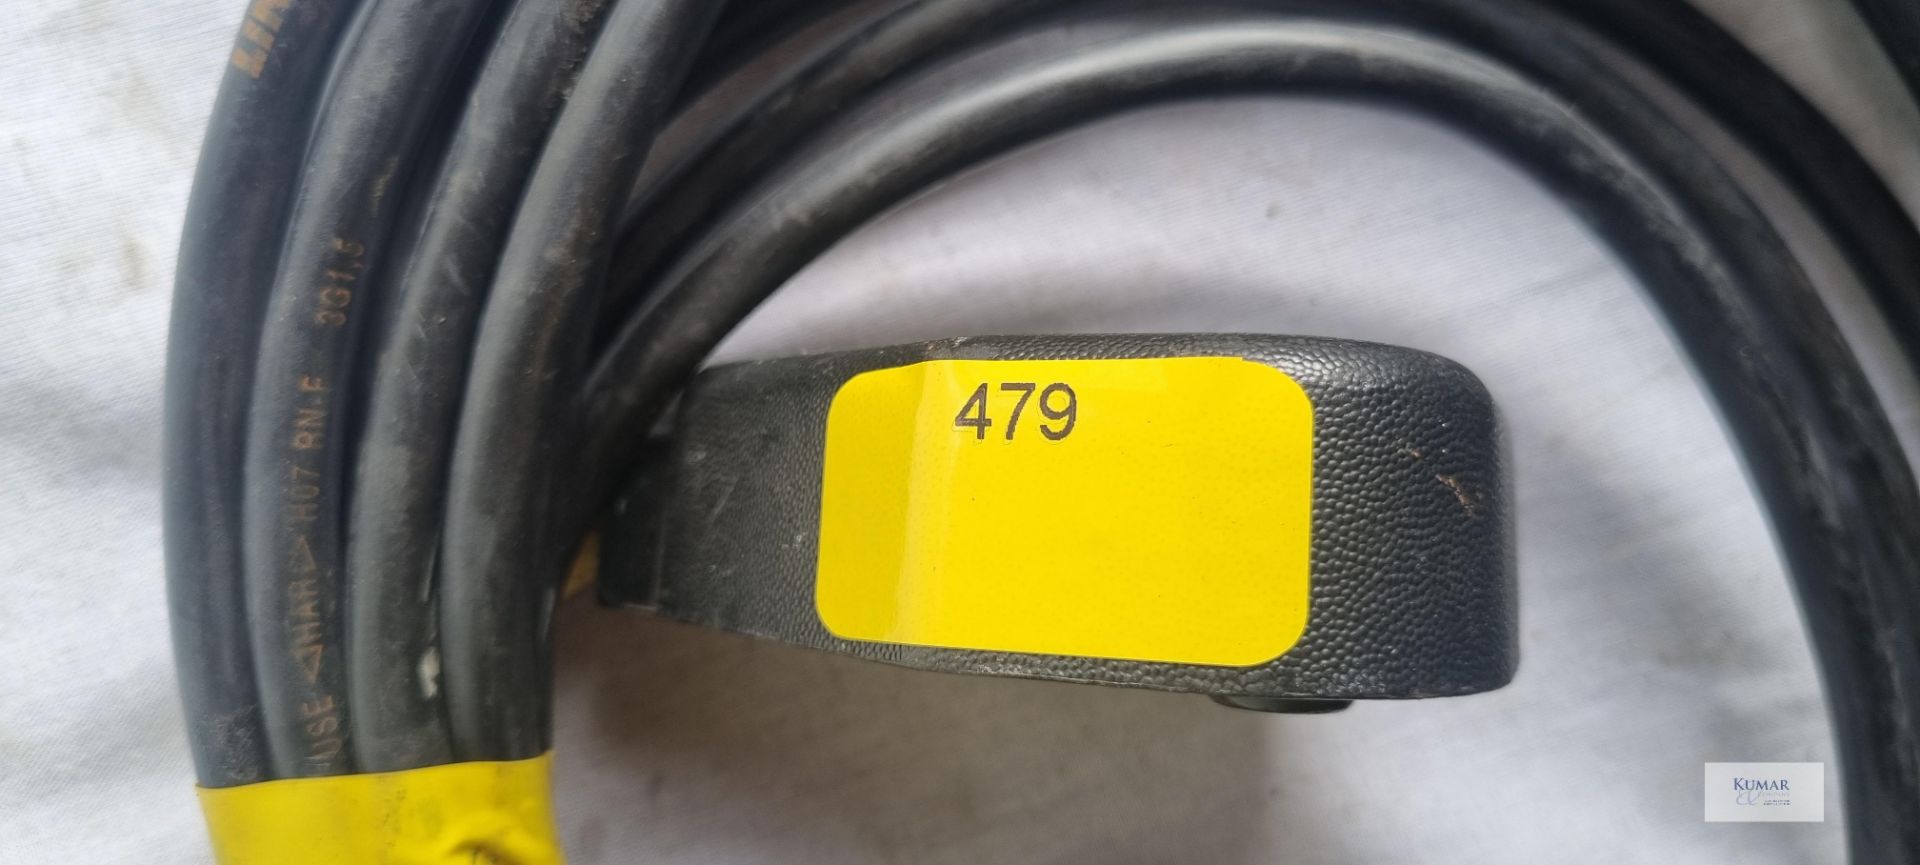 34 x 10m 15a Cable - Image 2 of 2